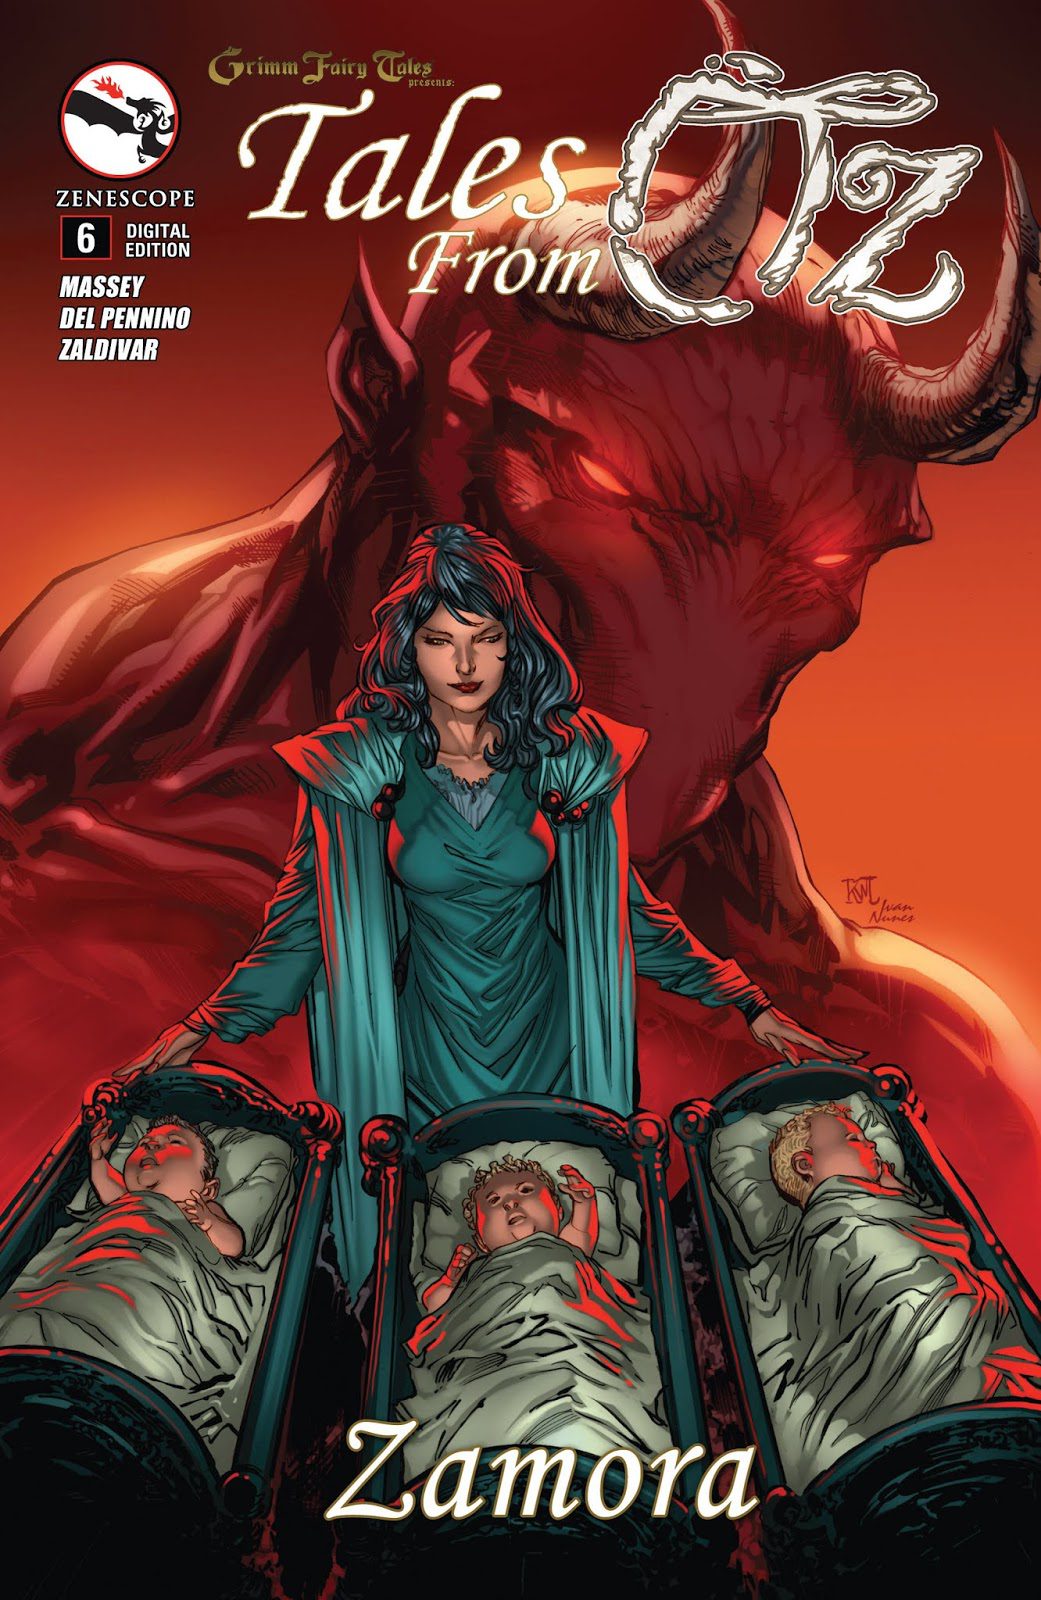 Comic completo Grimm Fairy Tales presents: Tales From Oz